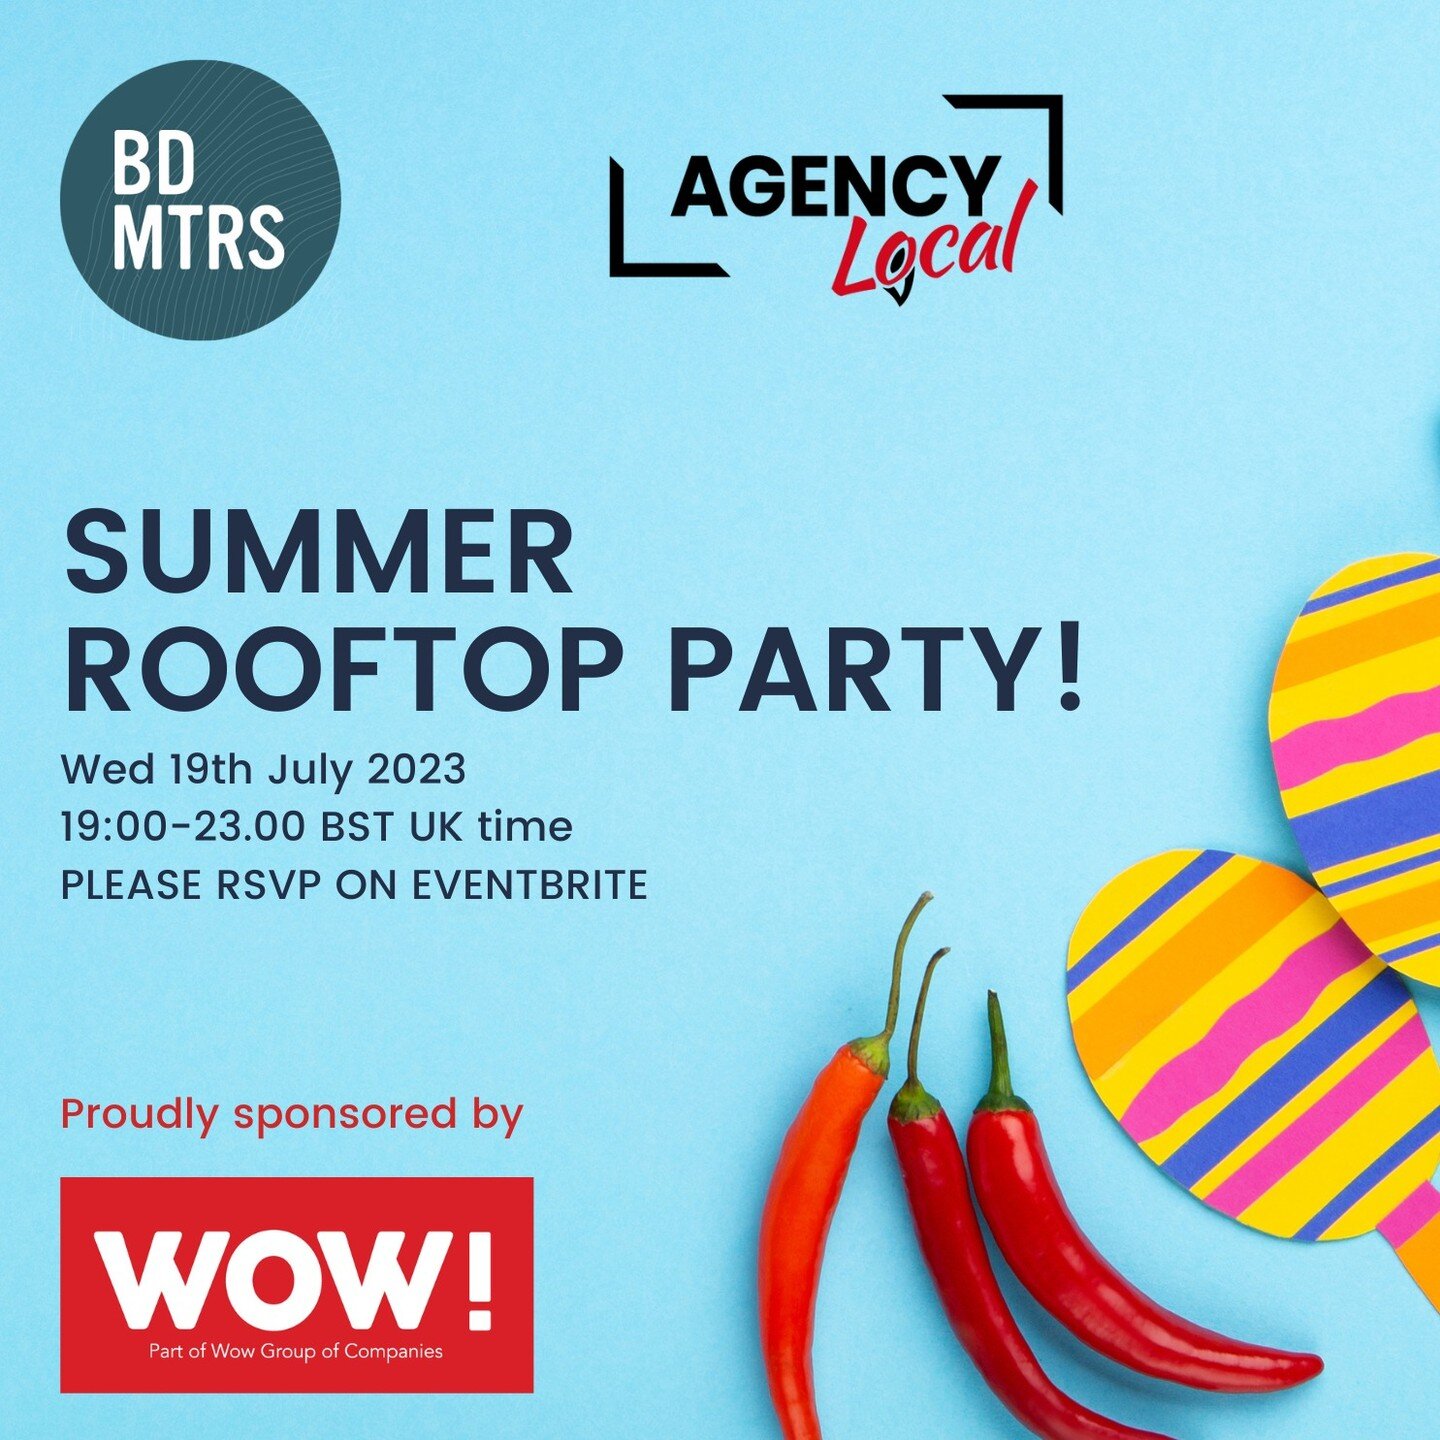 BD Matters has teamed up with Agency Local to bring you our annual summer rooftop party (Mexican-themed) and you&rsquo;re invited! The event is proudly sponsored by WOW Group. 

With our combined networks, it's a great chance to network and build mor